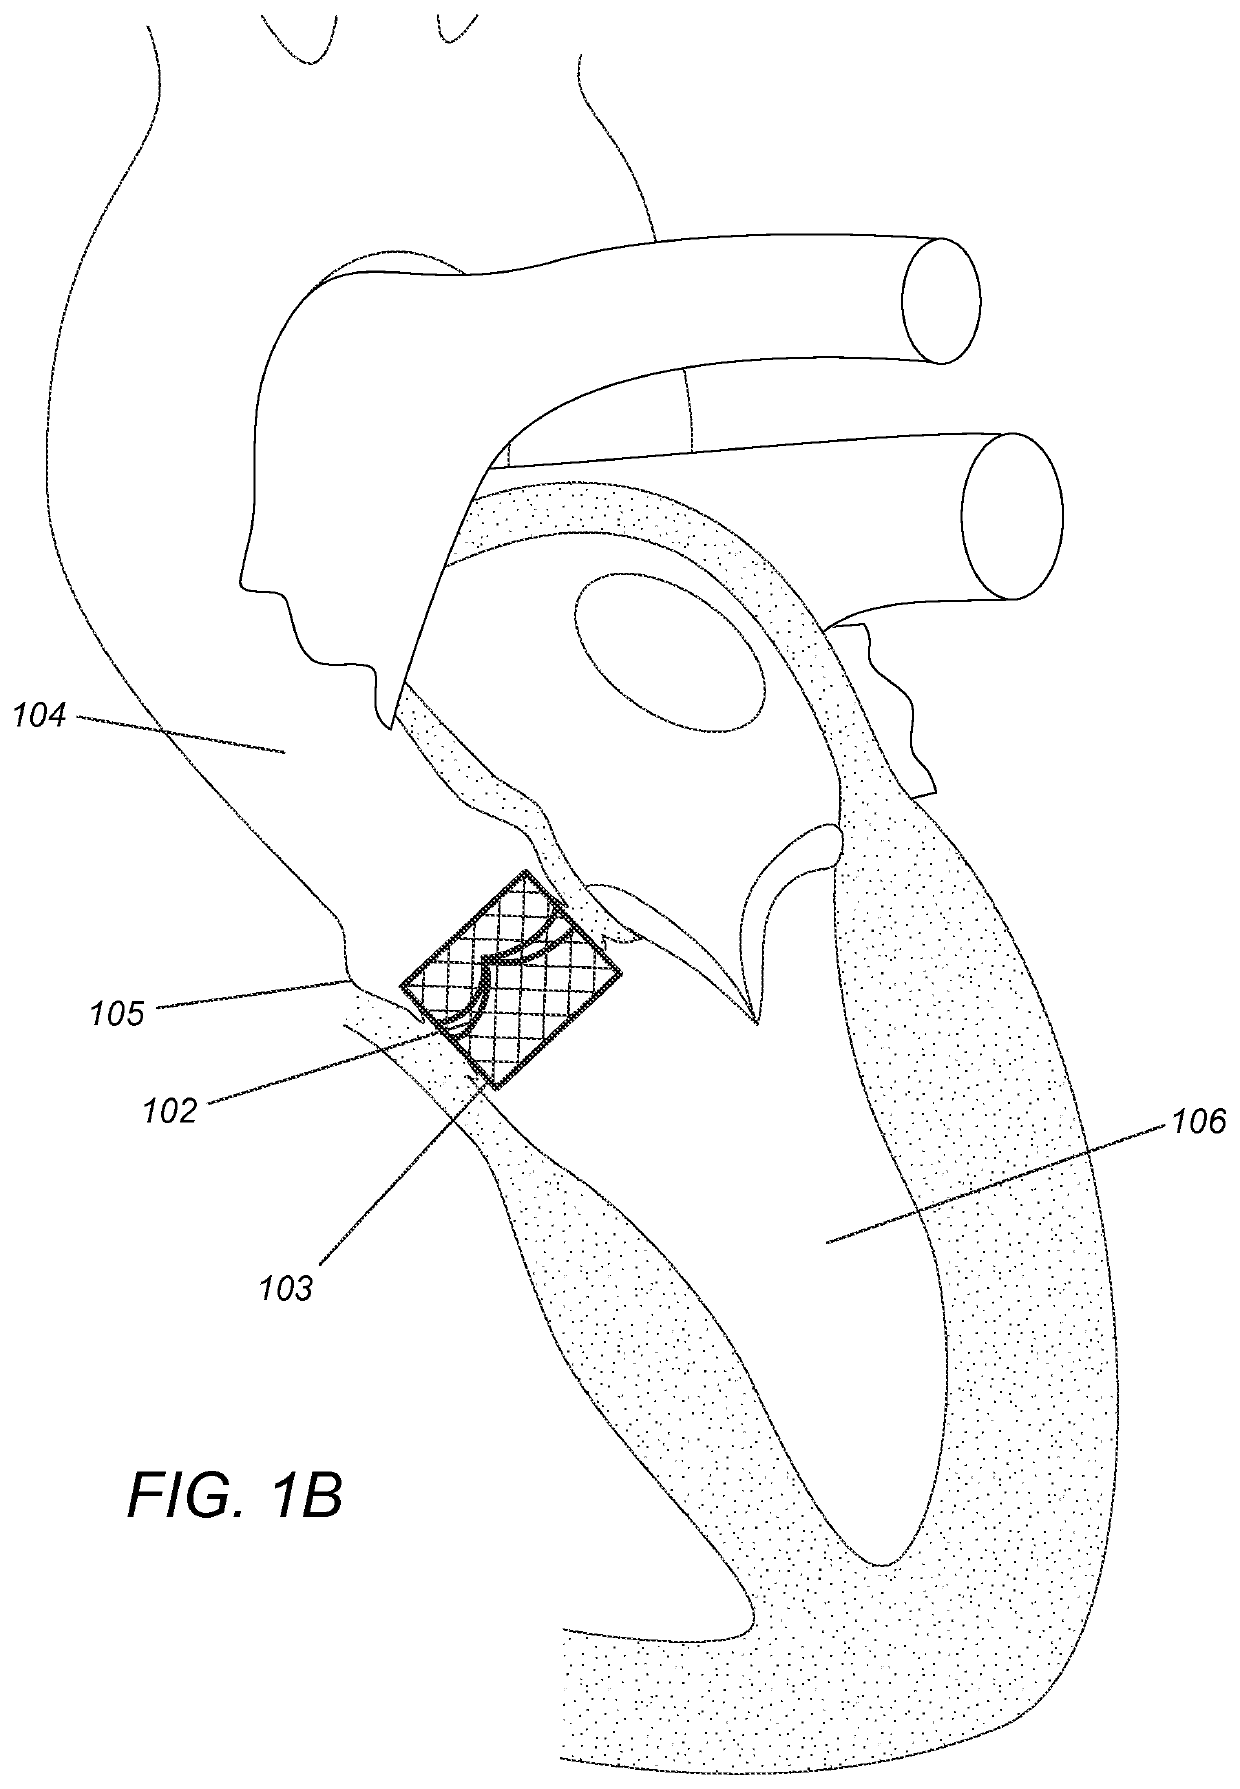 Modular dis-assembly of transcatheter valve replacement devices and uses thereof